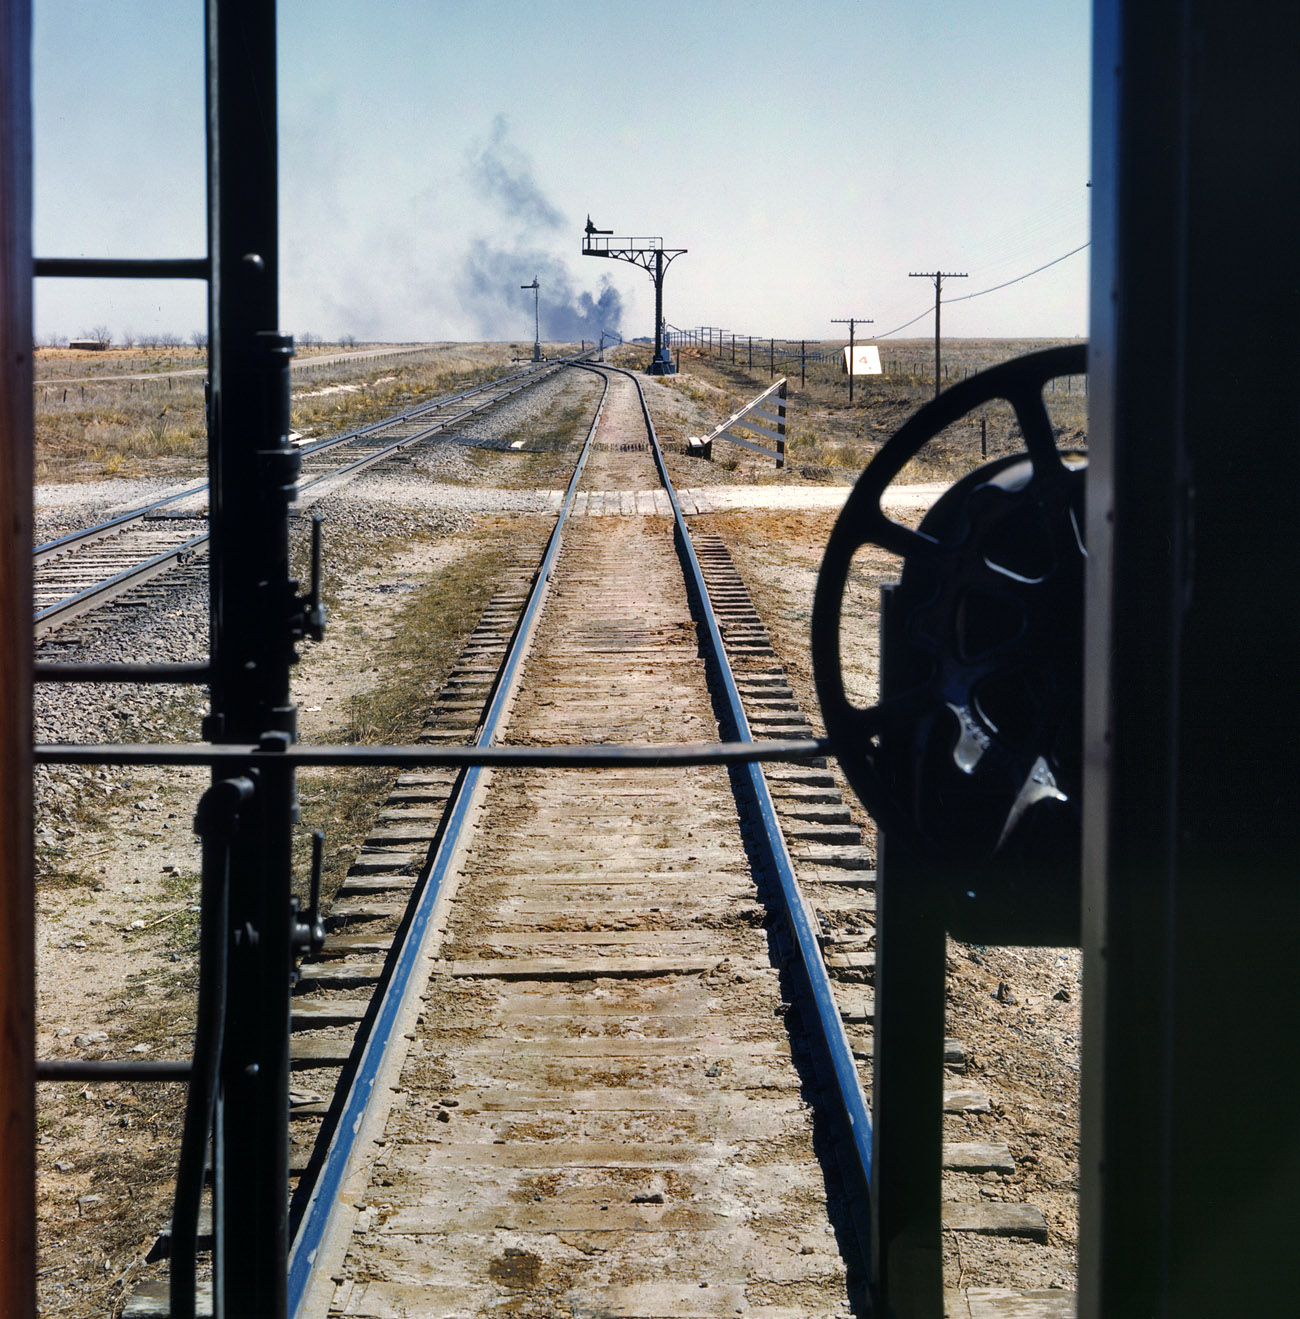 March 1943. Melrose, New Mexico. Chicago to California trip. "Santa Fe R.R. train." View full size. 4x5 Kodachrome transparency by Jack Delano.